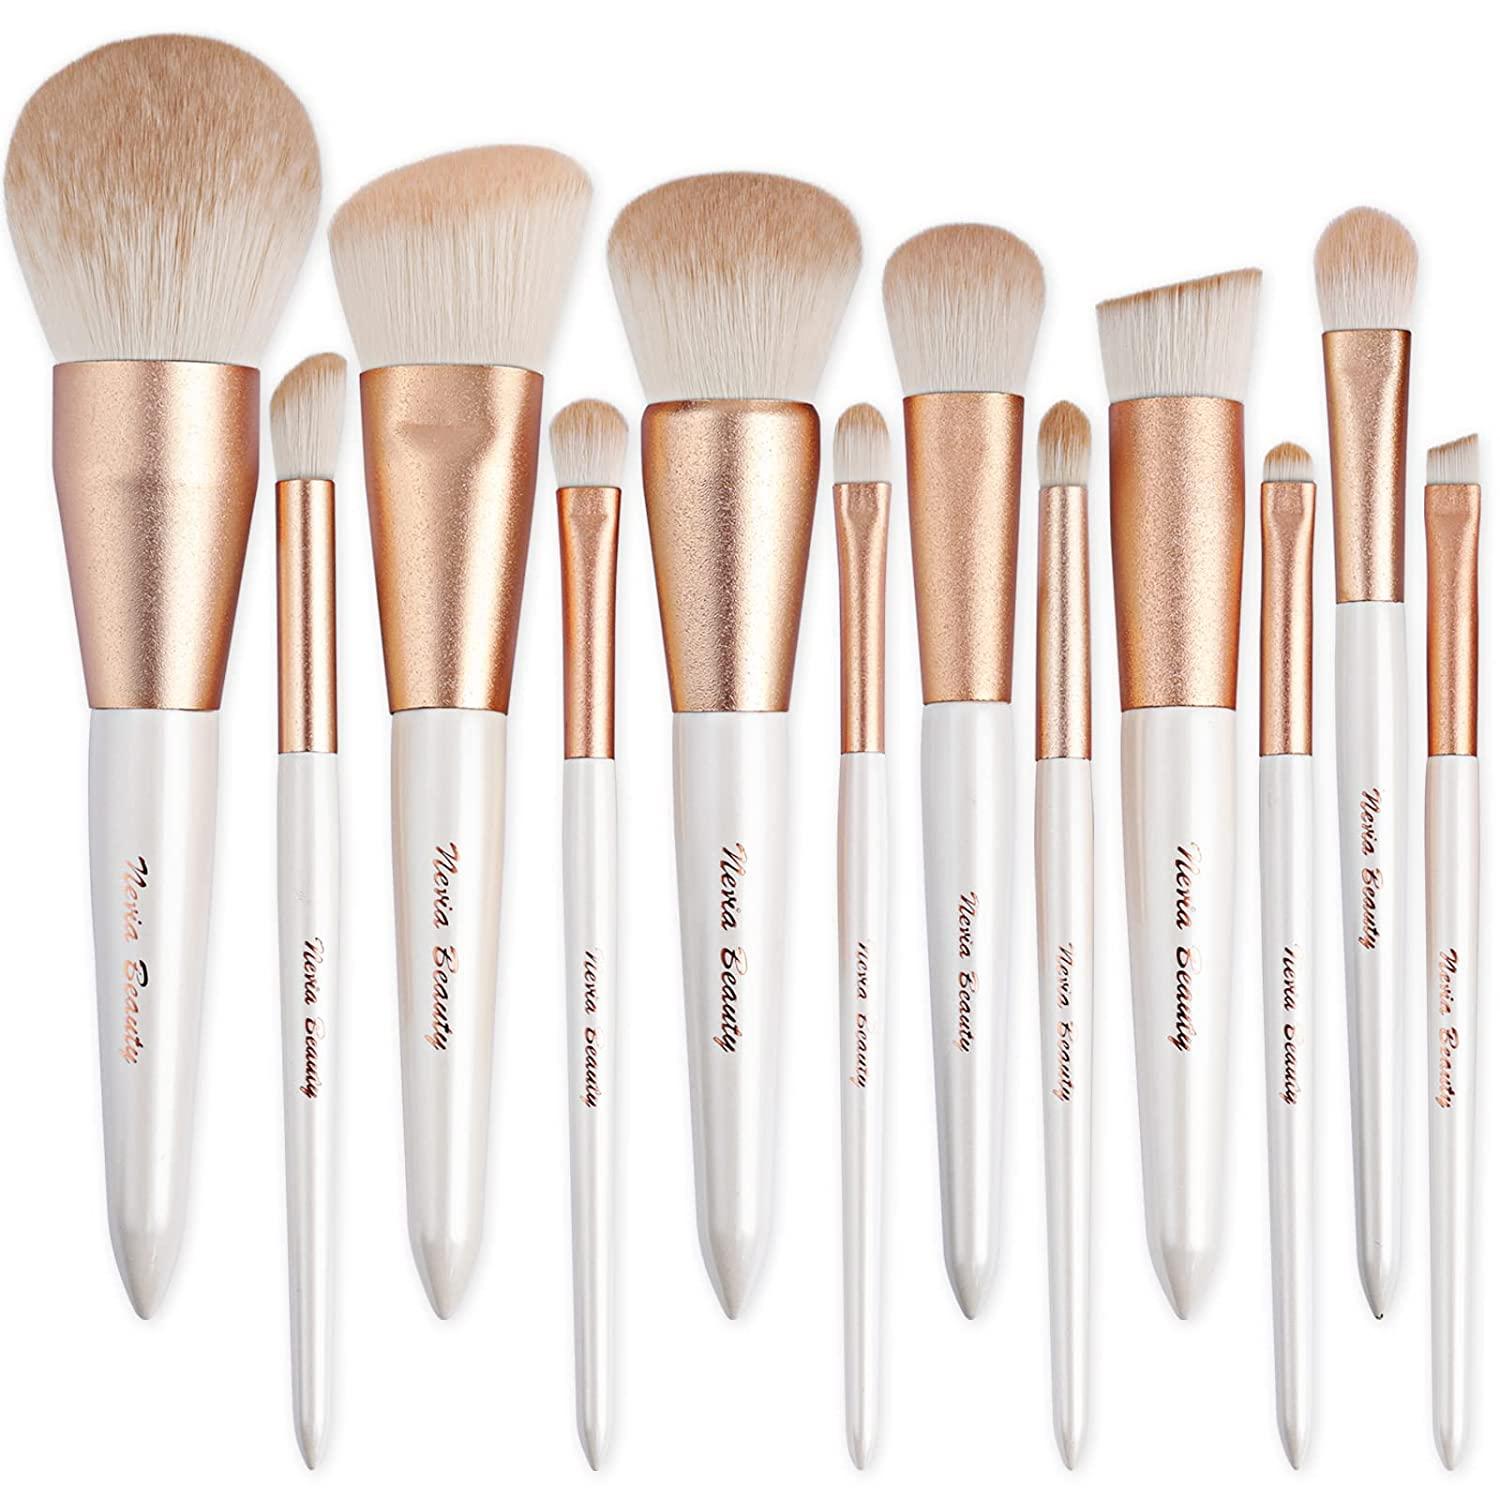 Tools For Beauty - Professional Makeup Brushes Set, white, 12 pcs